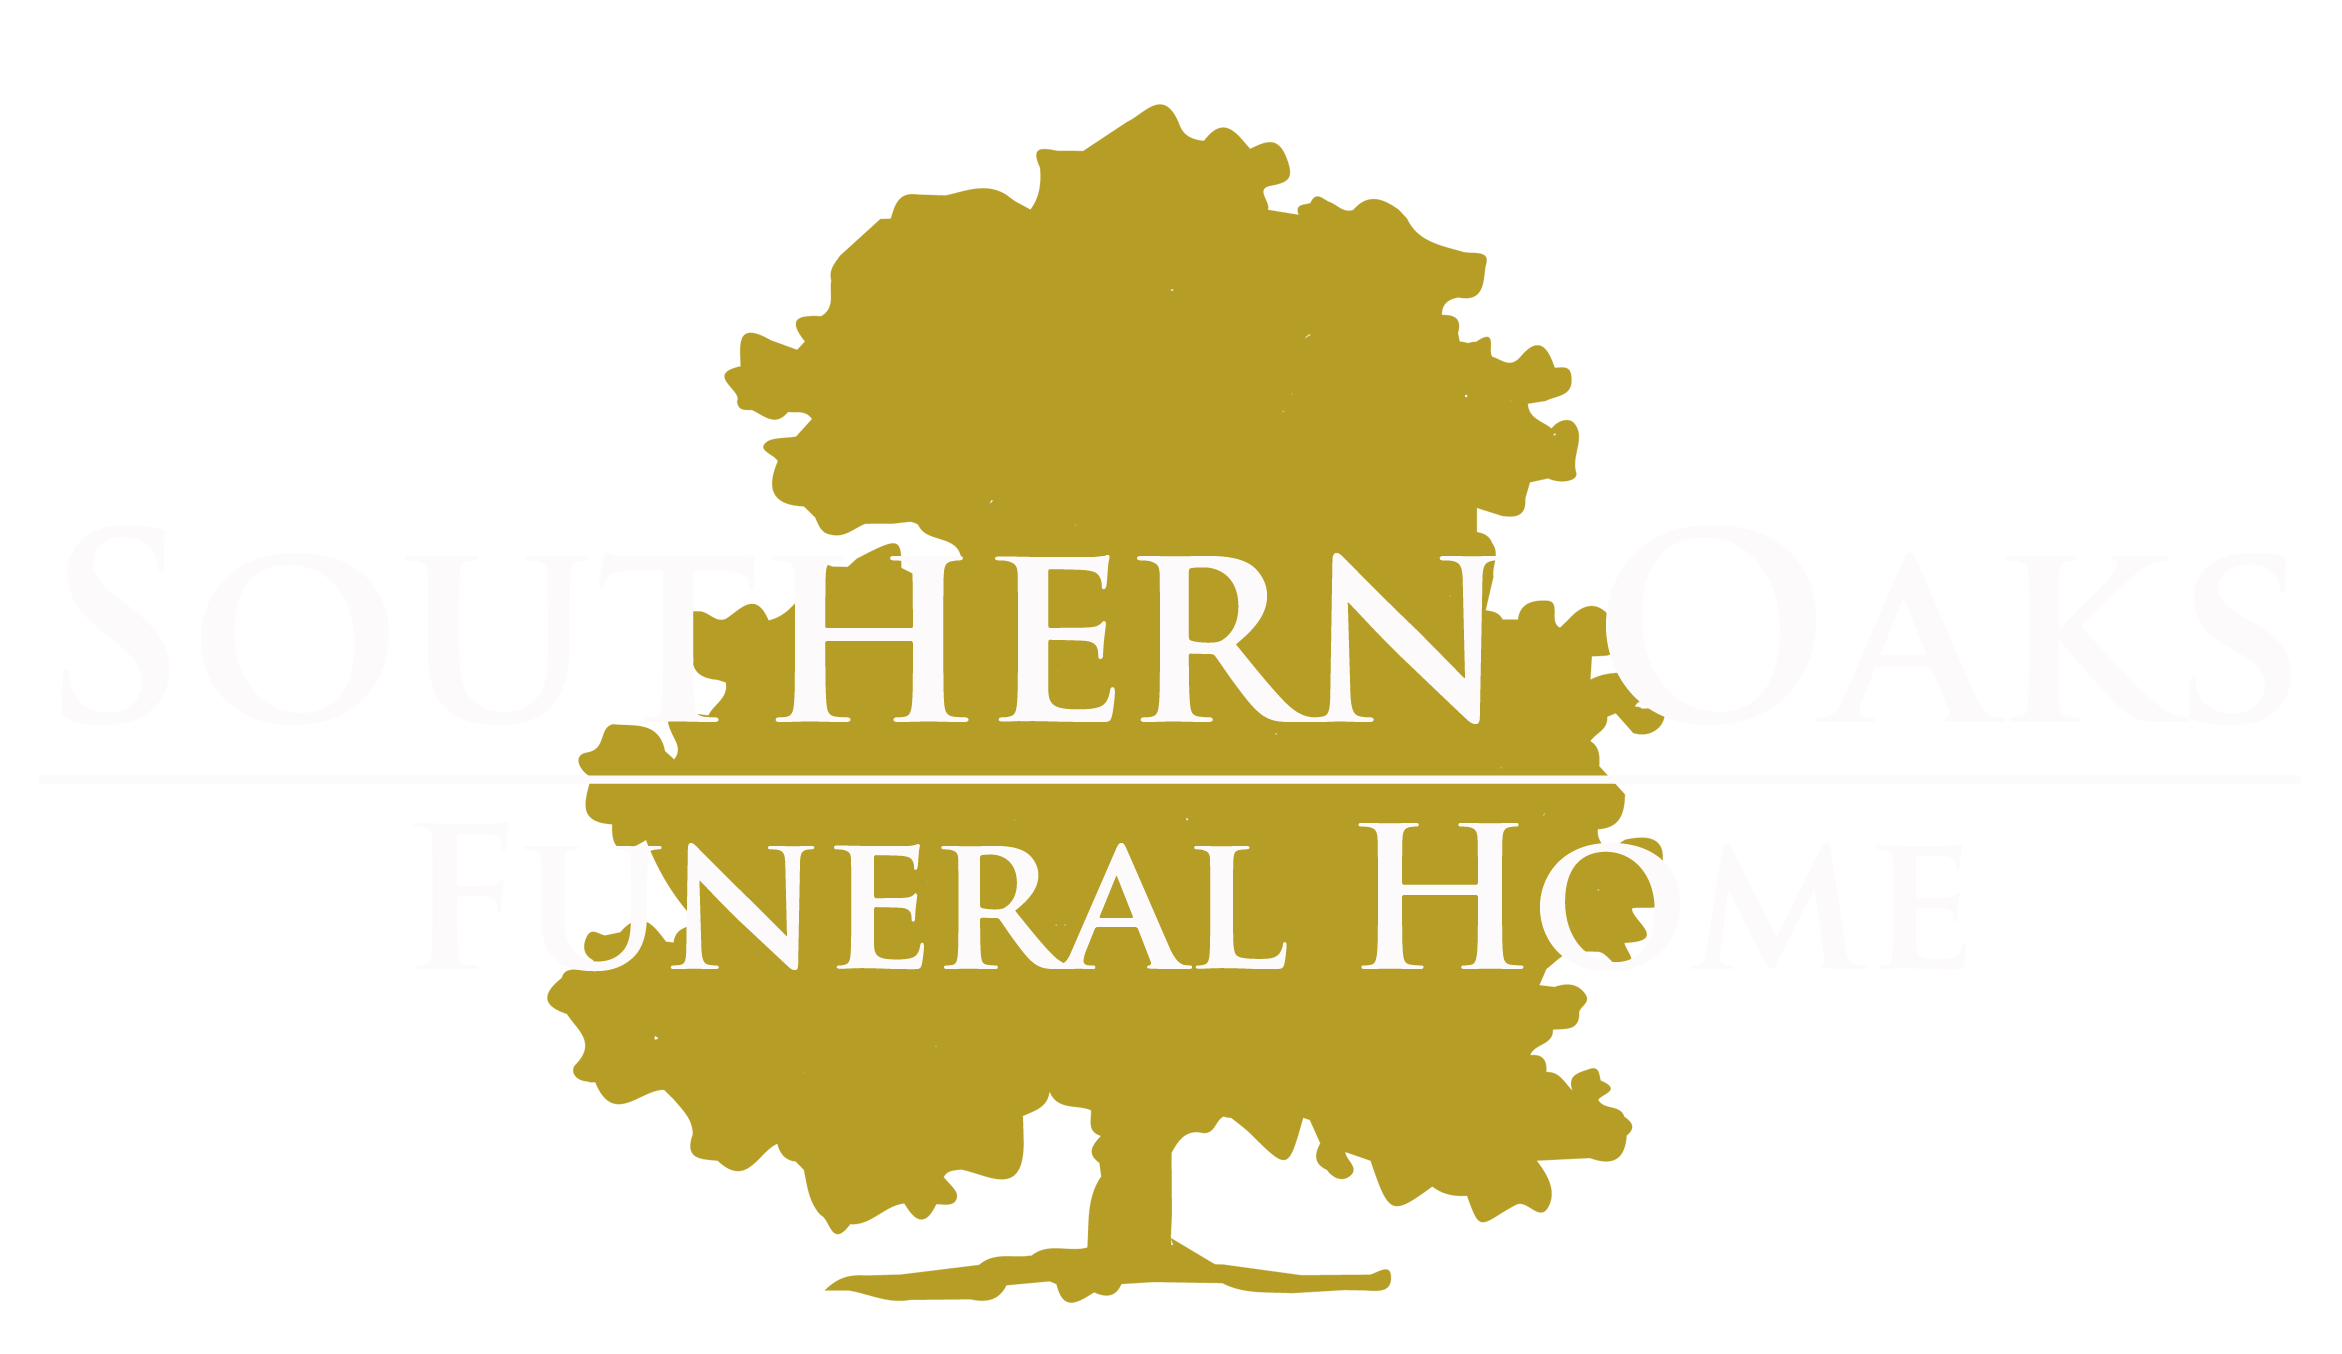 Southern oaks somerset ky. Funeral clipart peace lily